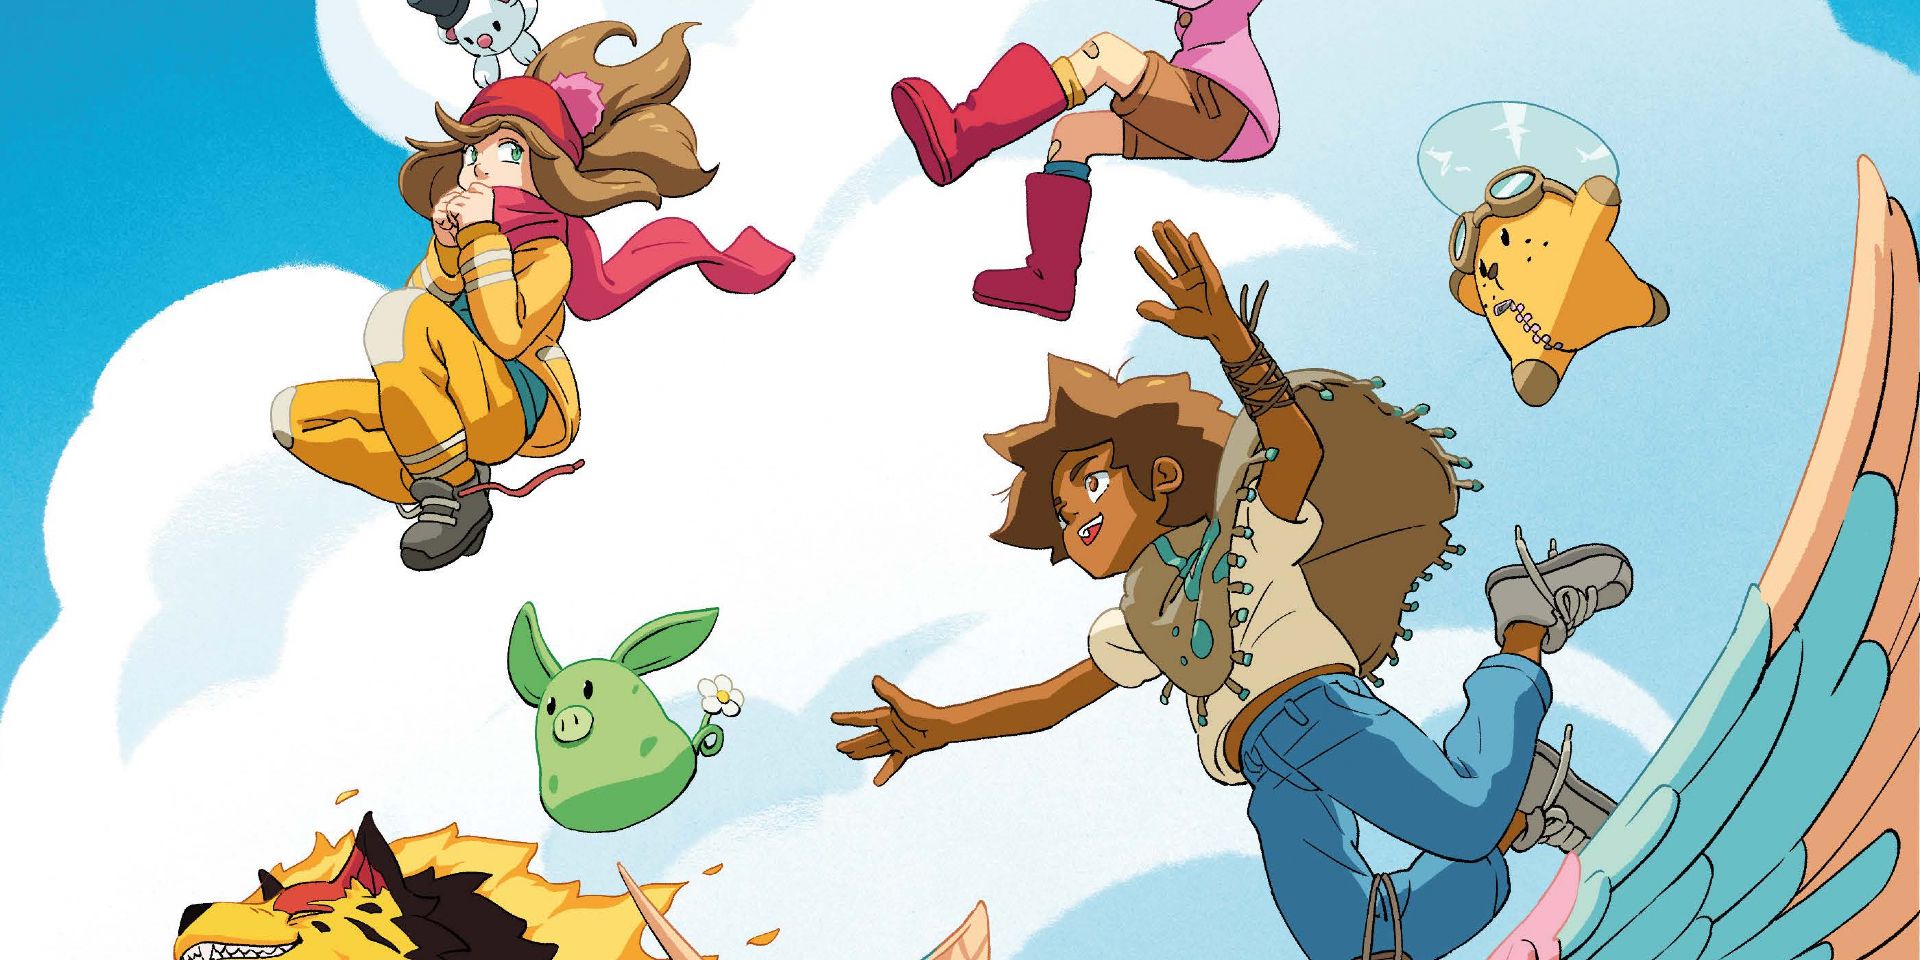 Pokémon & Digimon-Style Tabletop RPGs With Monster-Collecting Trainers